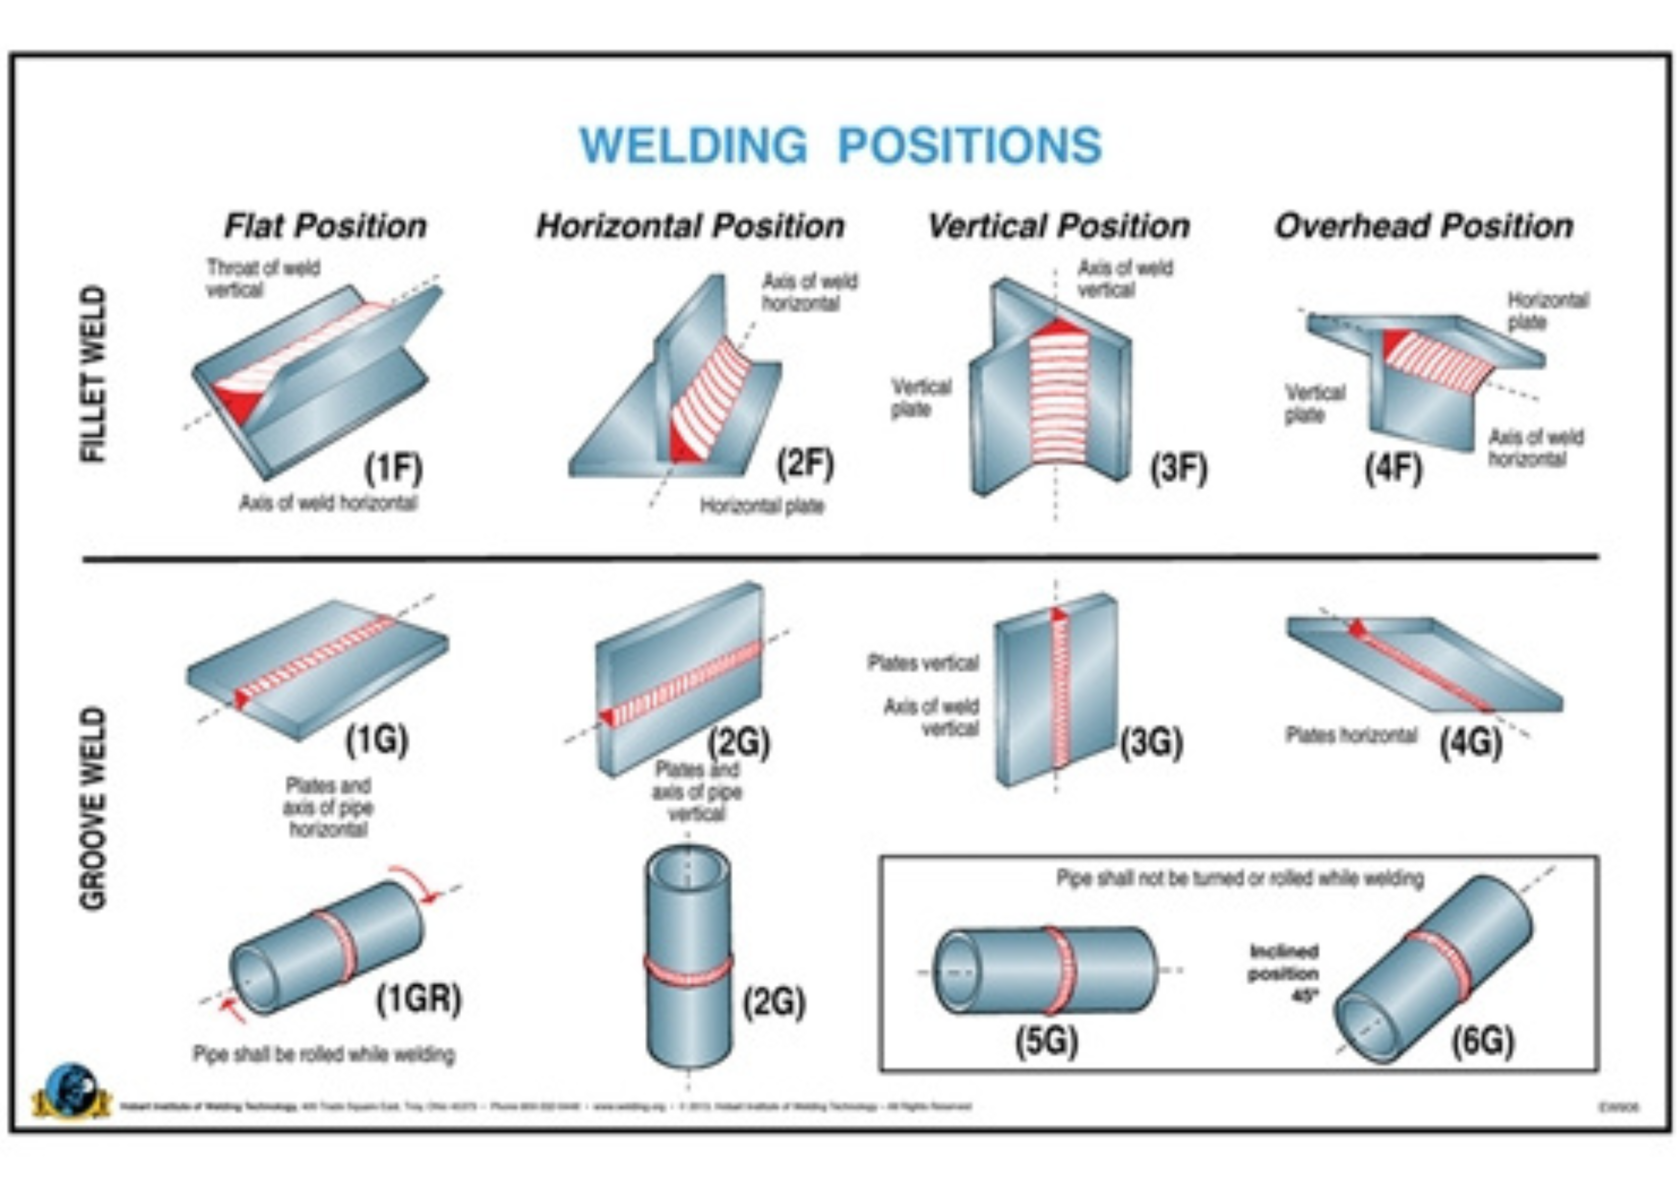 5 Types of Welding Positions: 1g 2f 3g 4g